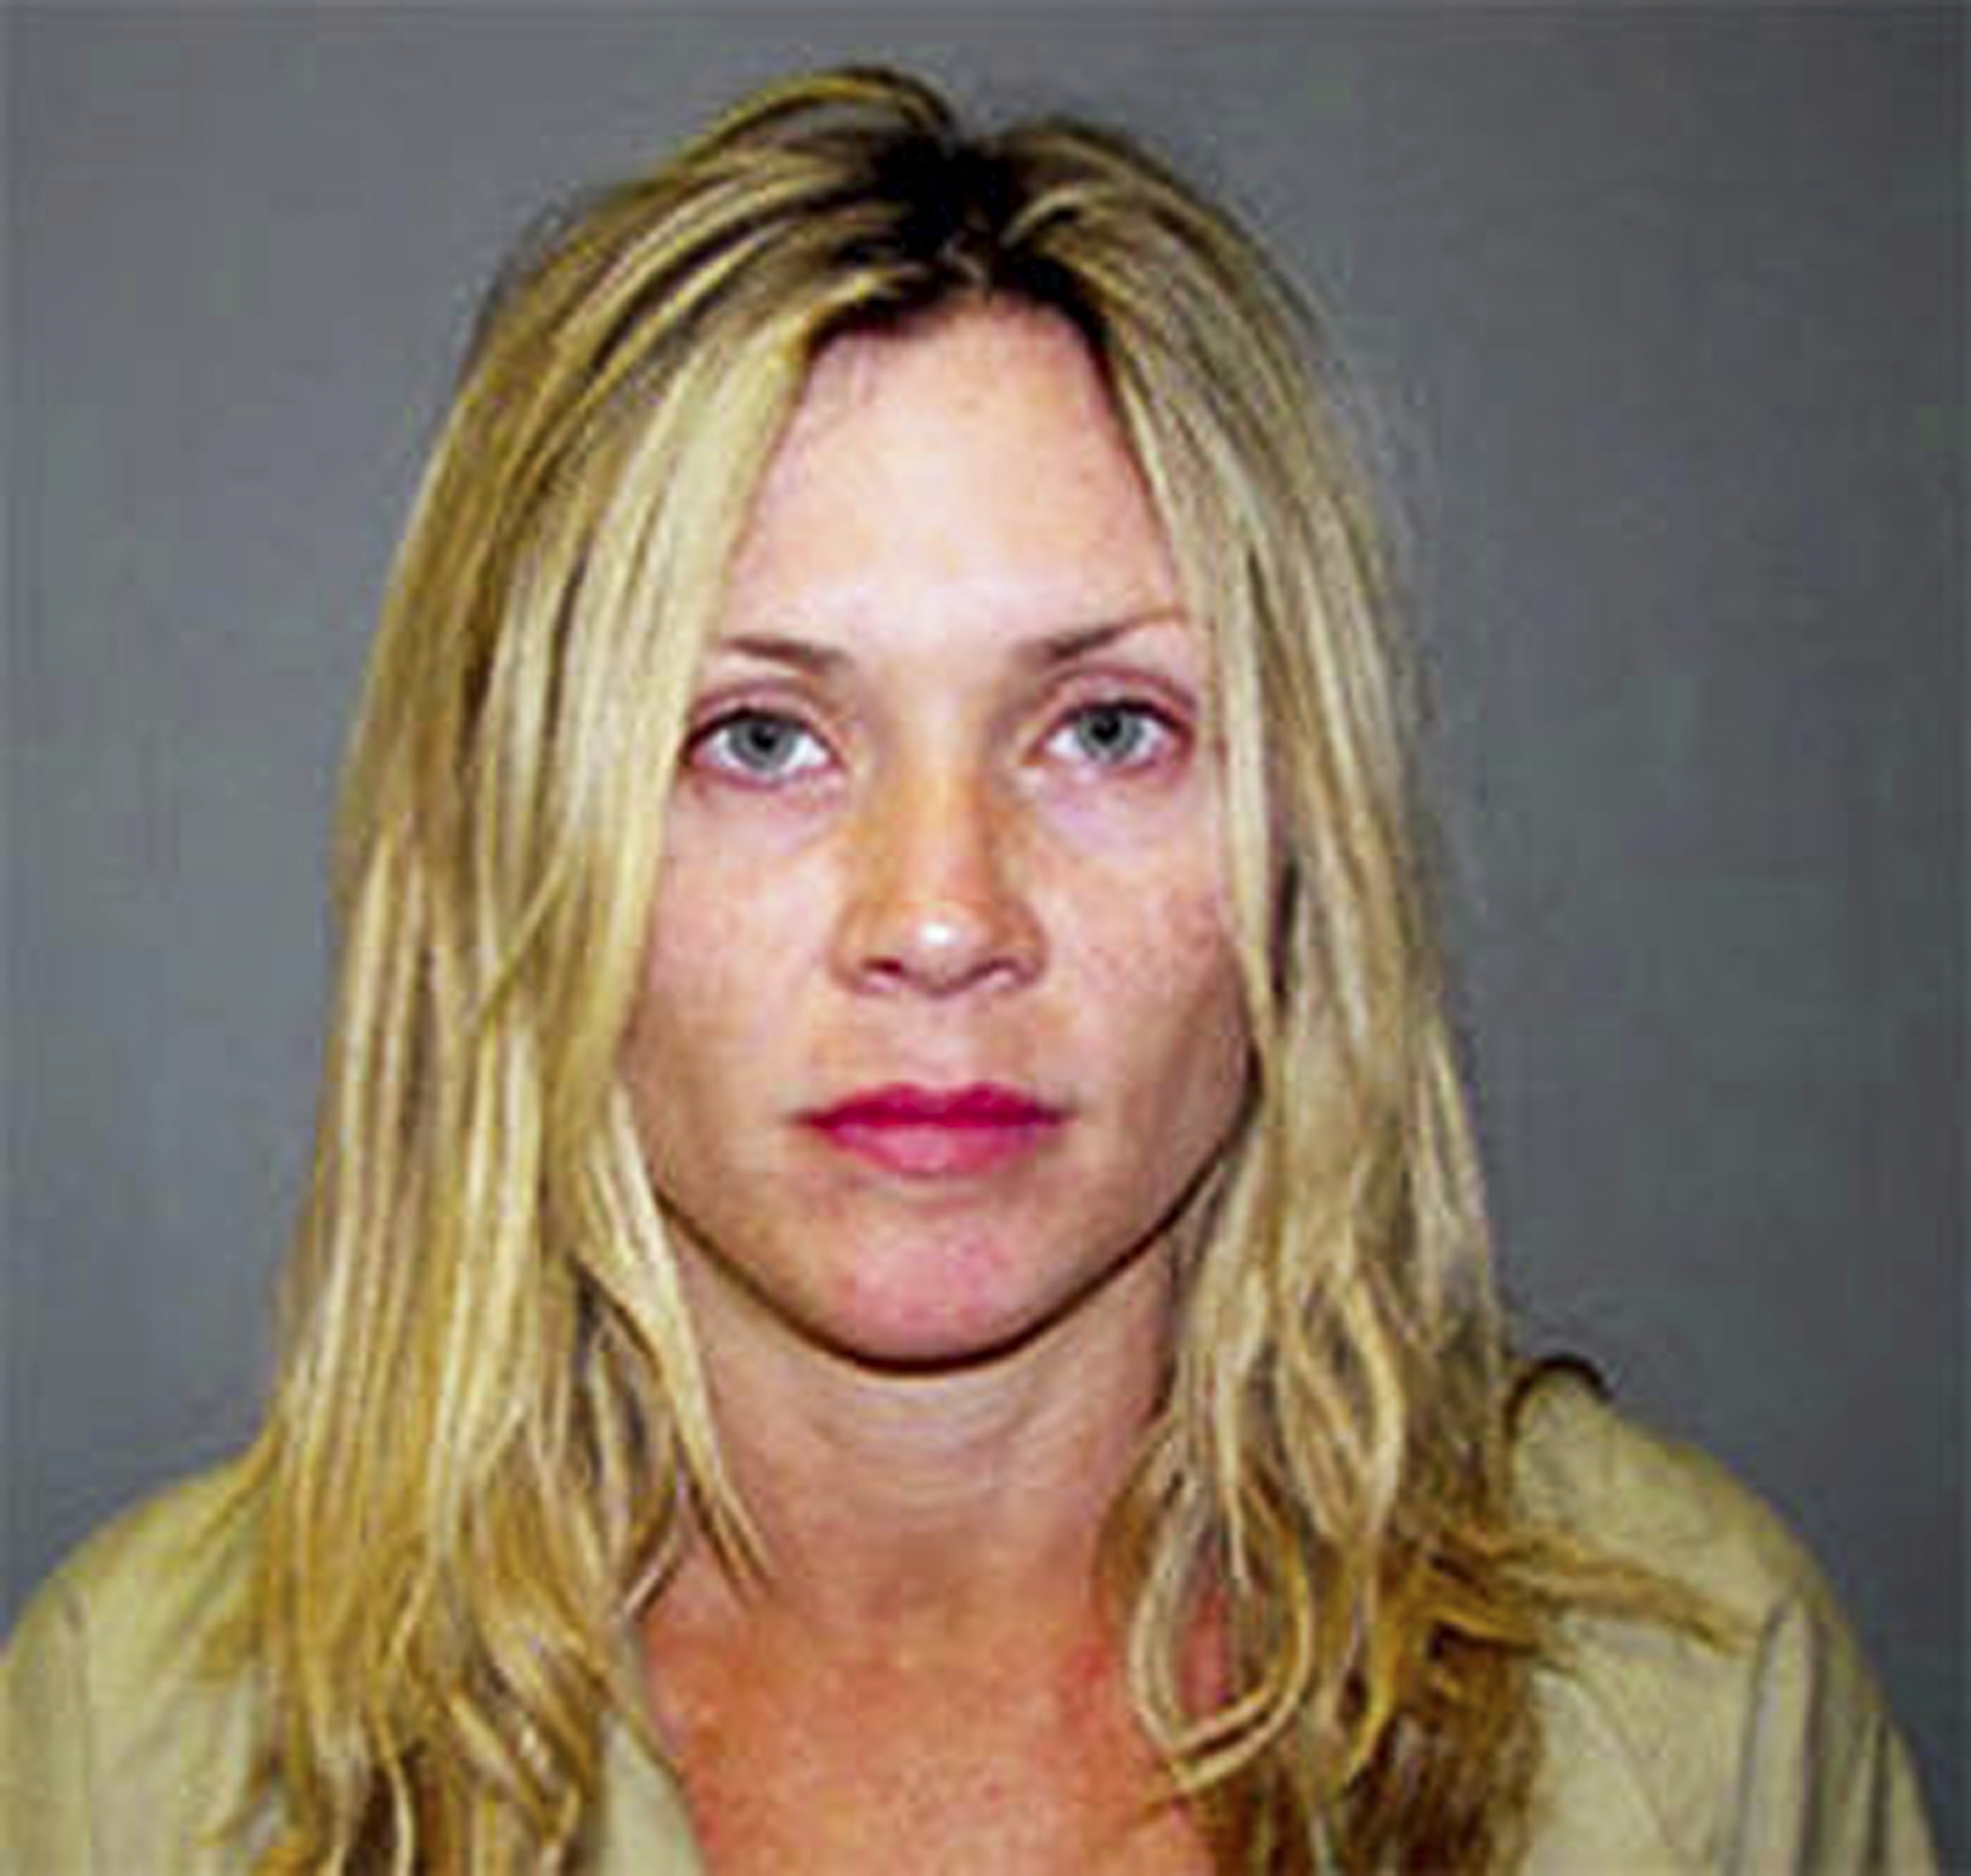 Amy Locane's mugshot taken in Somerville, New Jersey on June 27, 2010 | Source: Getty Images